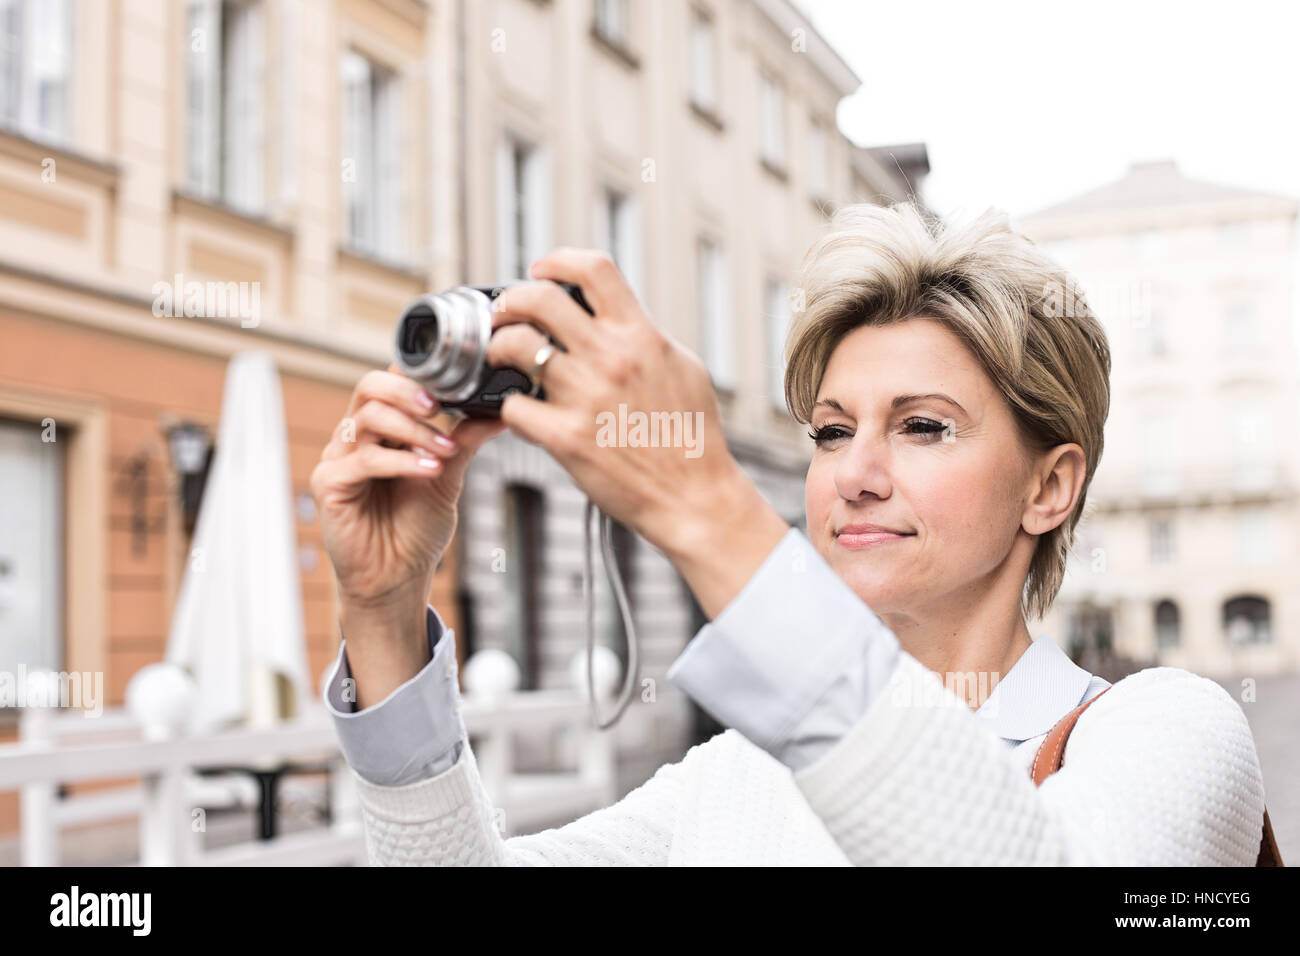 Woman photographing through digital camera in city Stock Photo